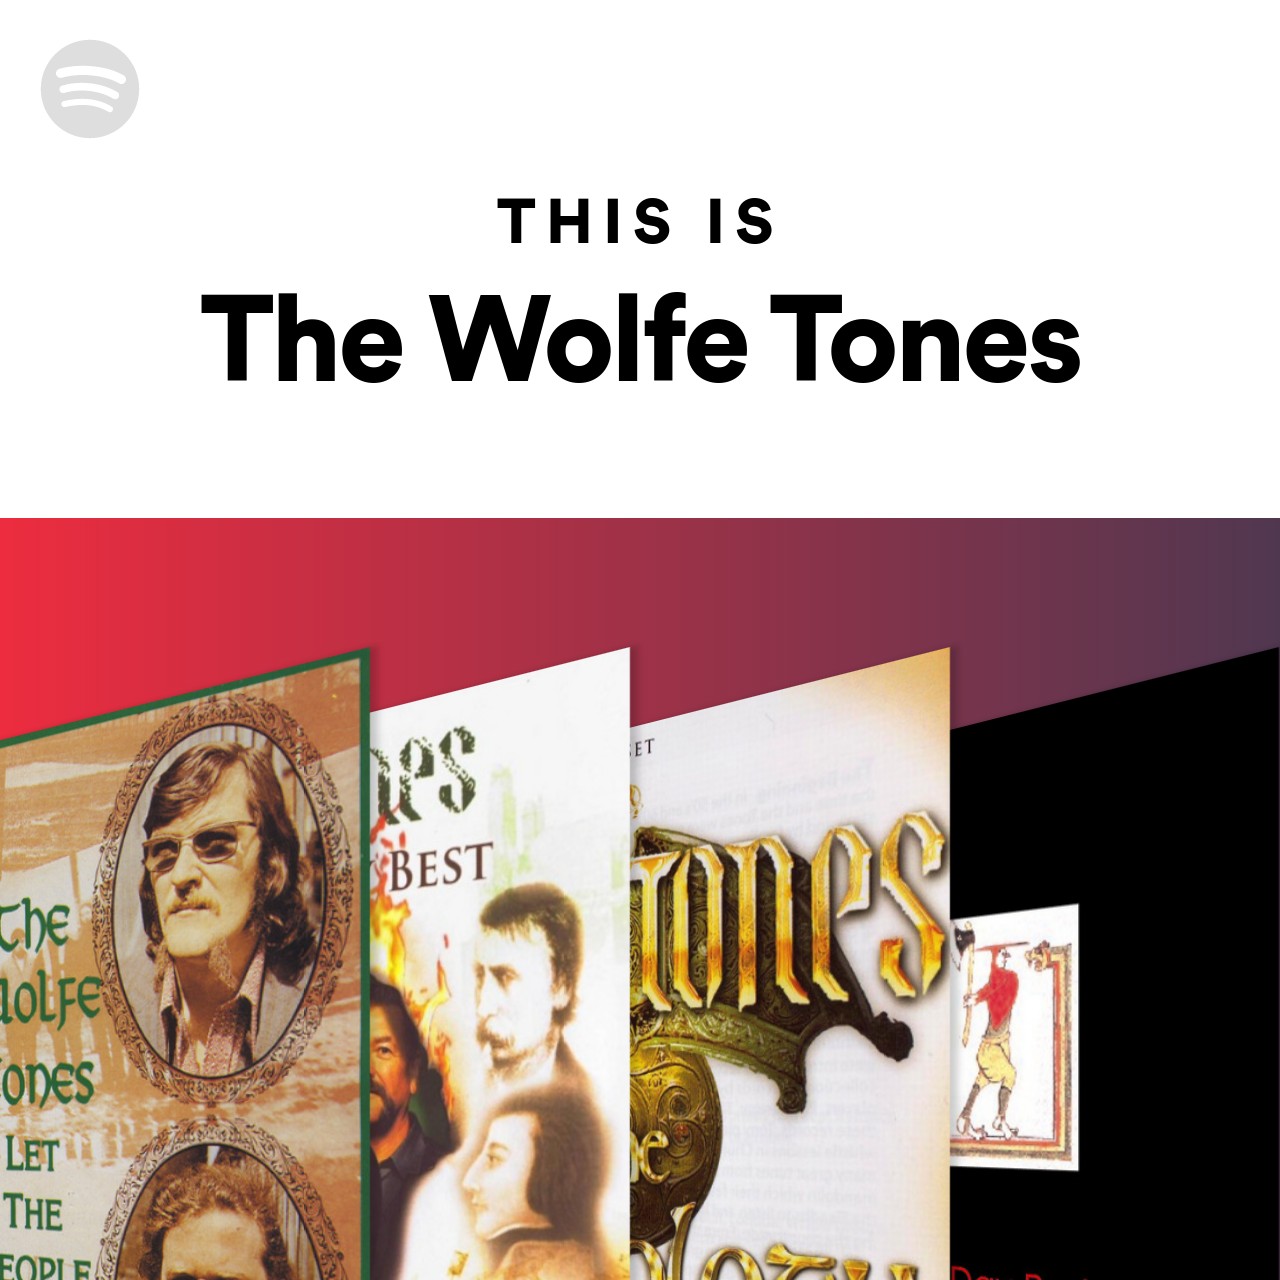 Toto je The Wolfe Tones